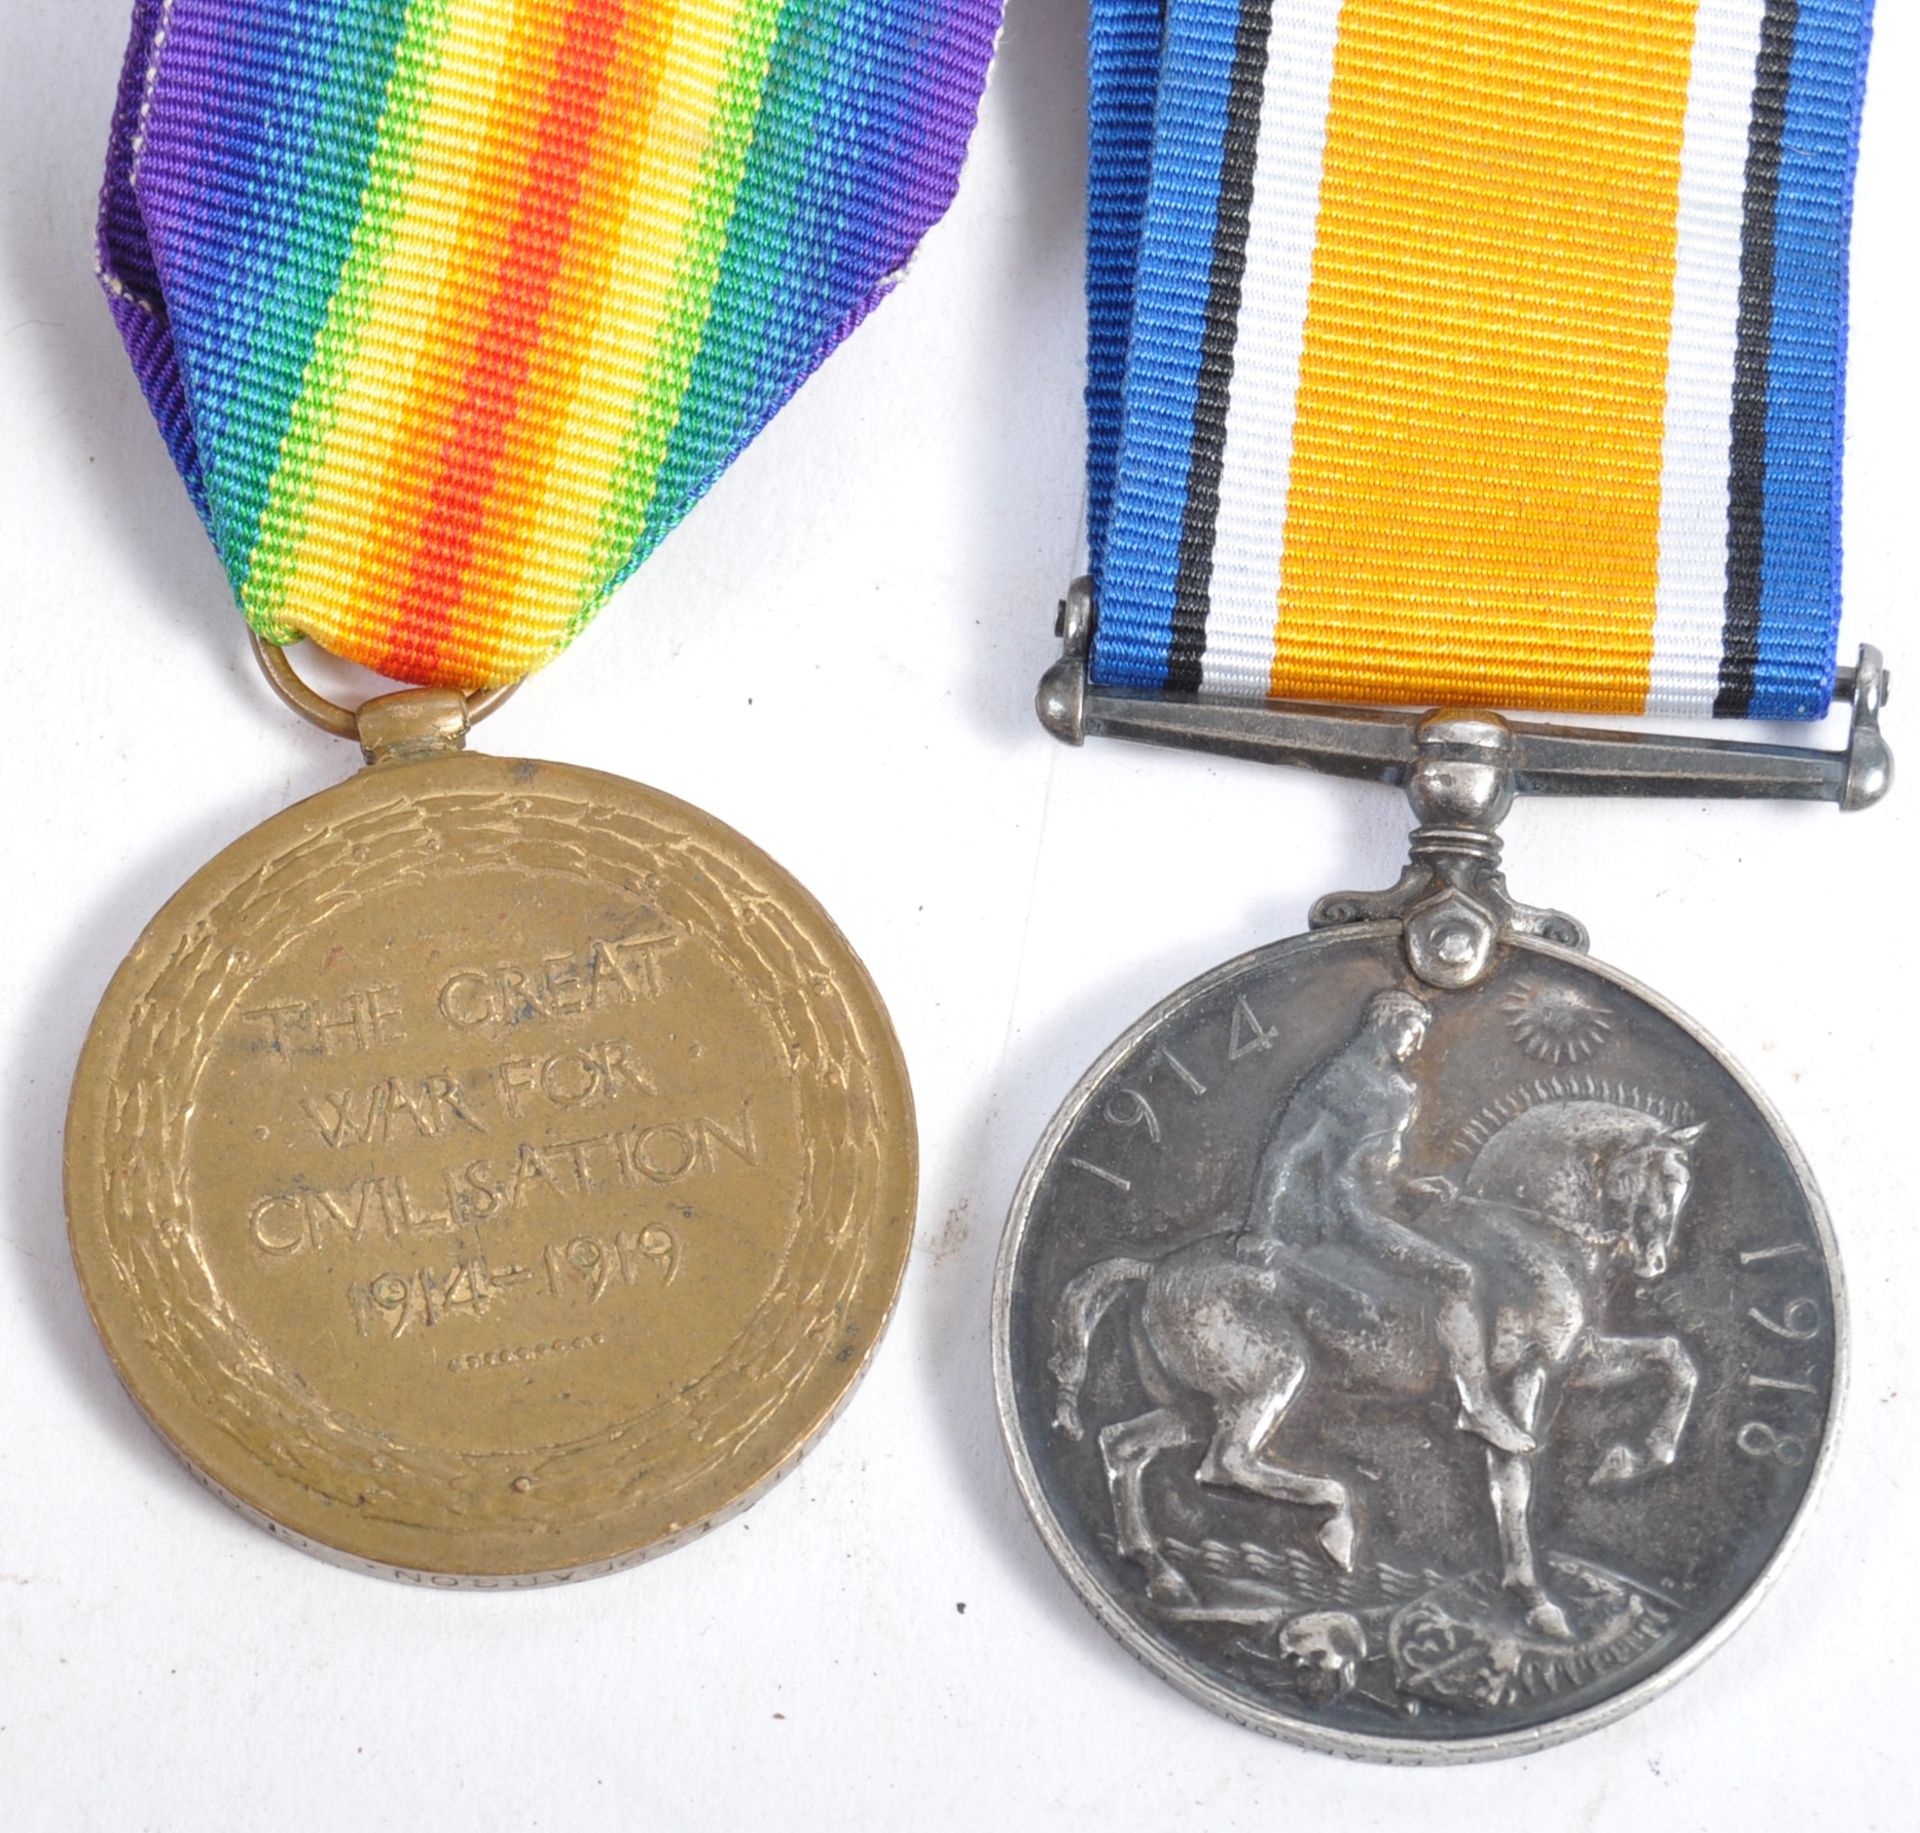 WWI FIRST WORLD WAR MEDAL PAIR & CAMERA - PRIVATE IN GLOUCESTER RGMT - Image 4 of 6